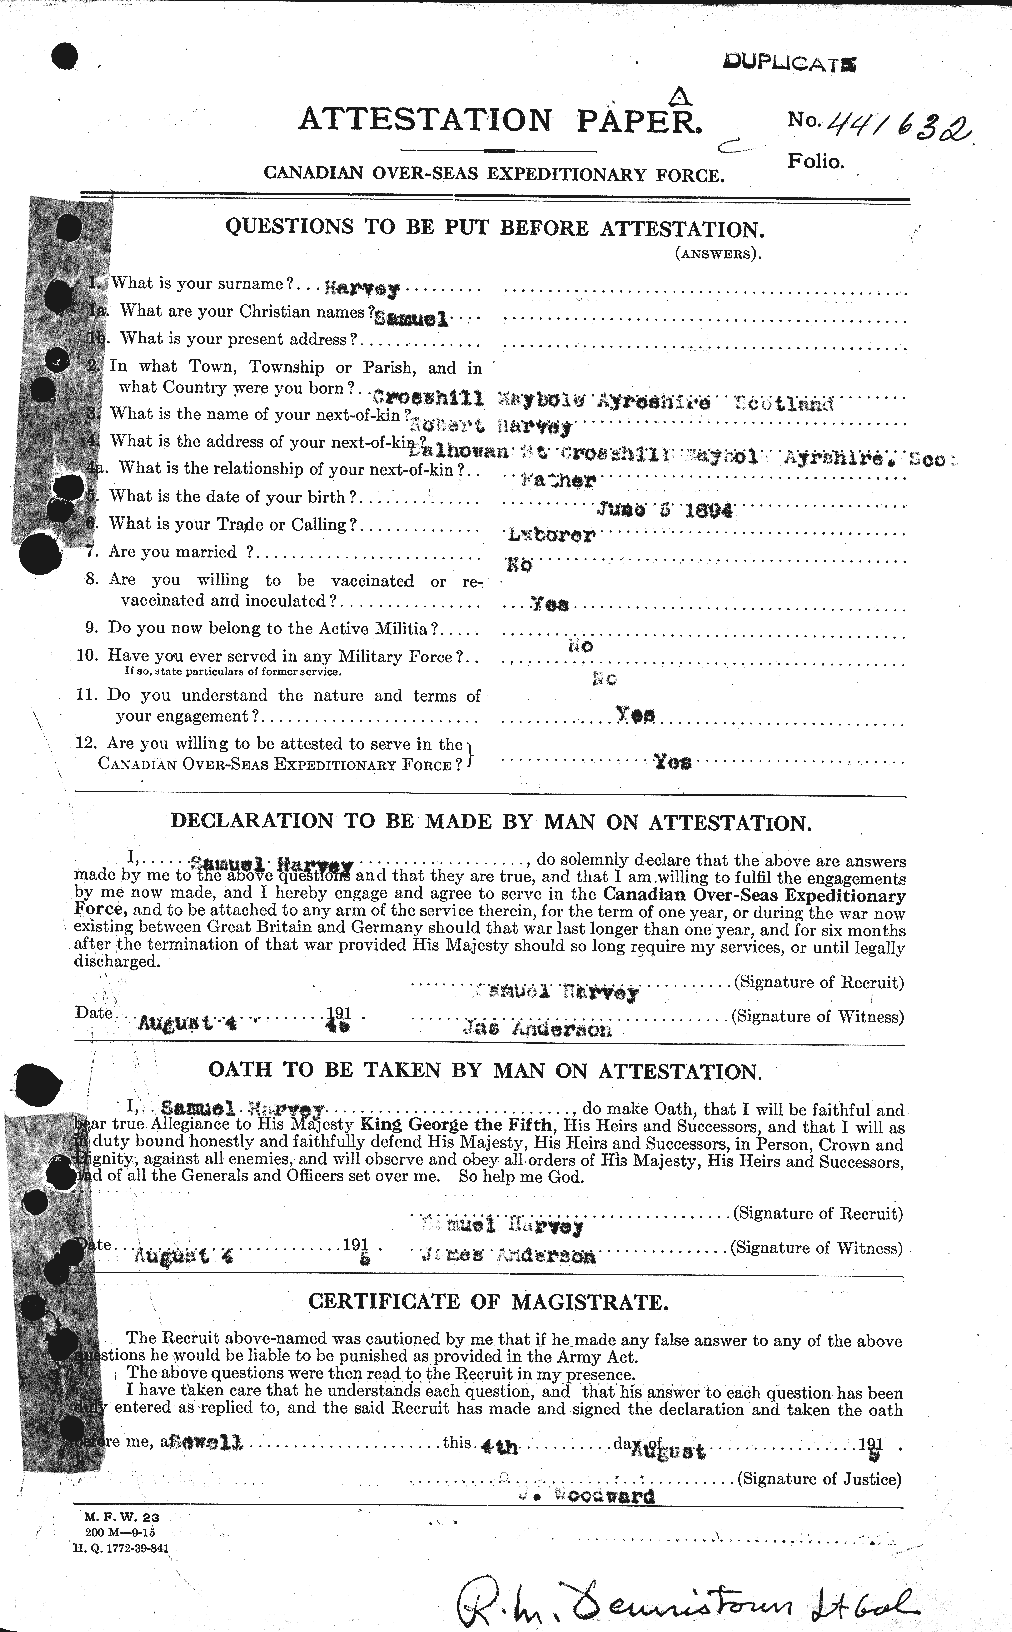 Personnel Records of the First World War - CEF 382157a